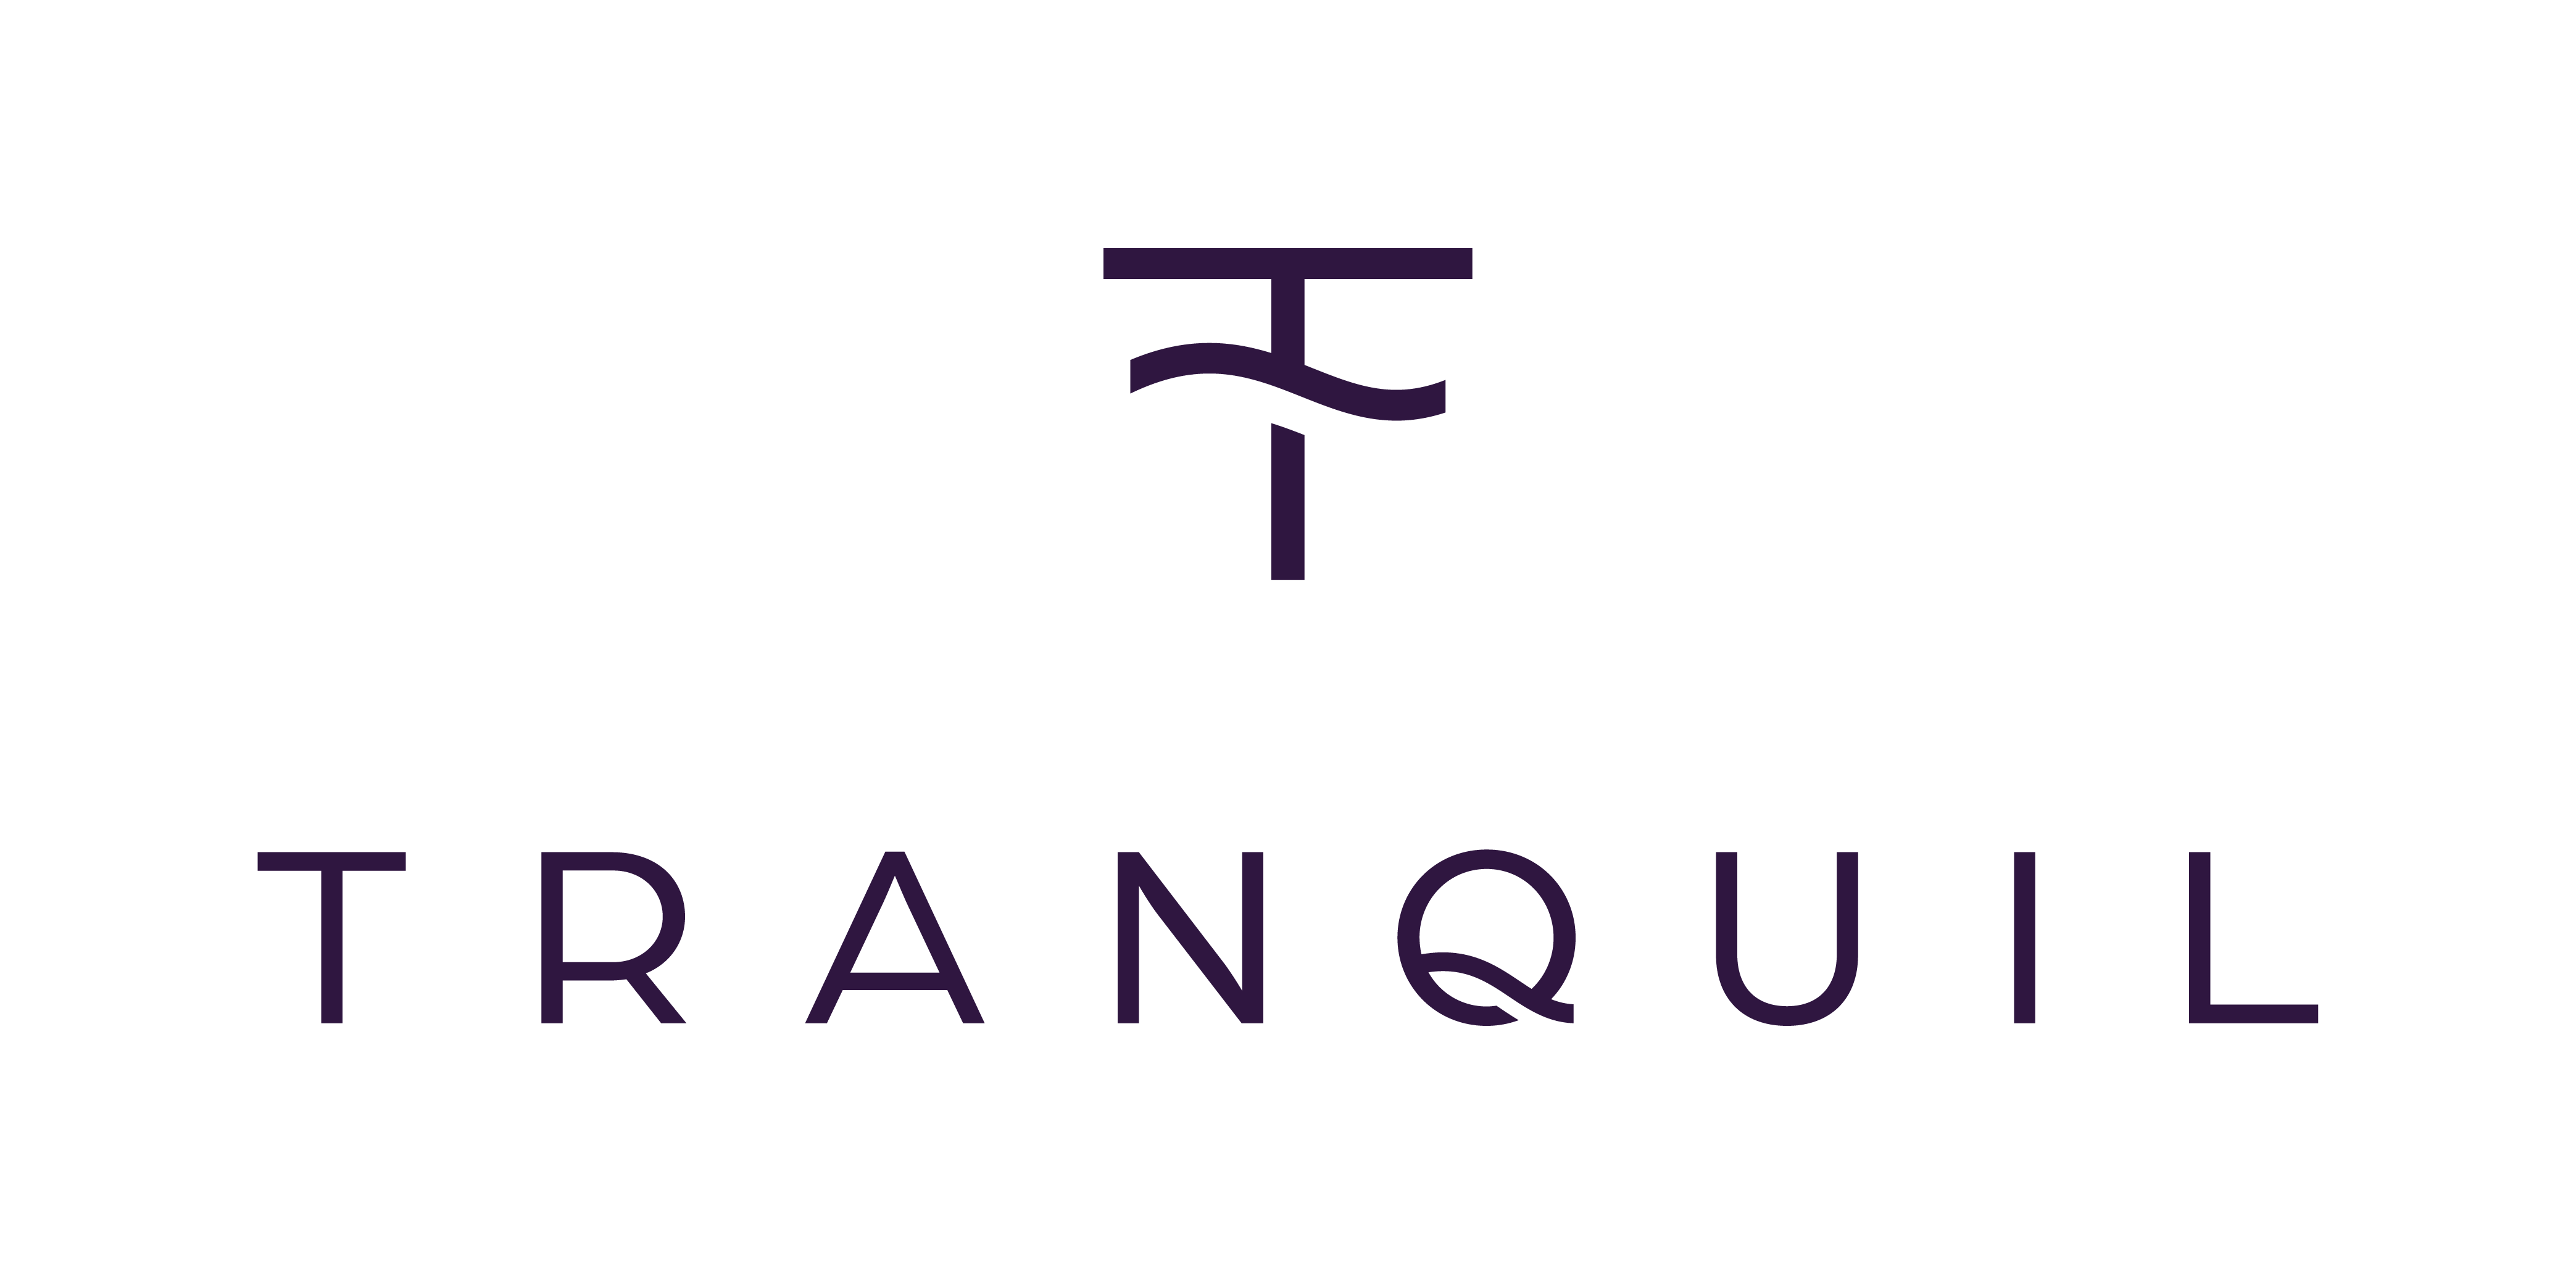 UK entrepreneur launches Tranquil; a new tech for elderly care after trip inspired by FD Roosevelt